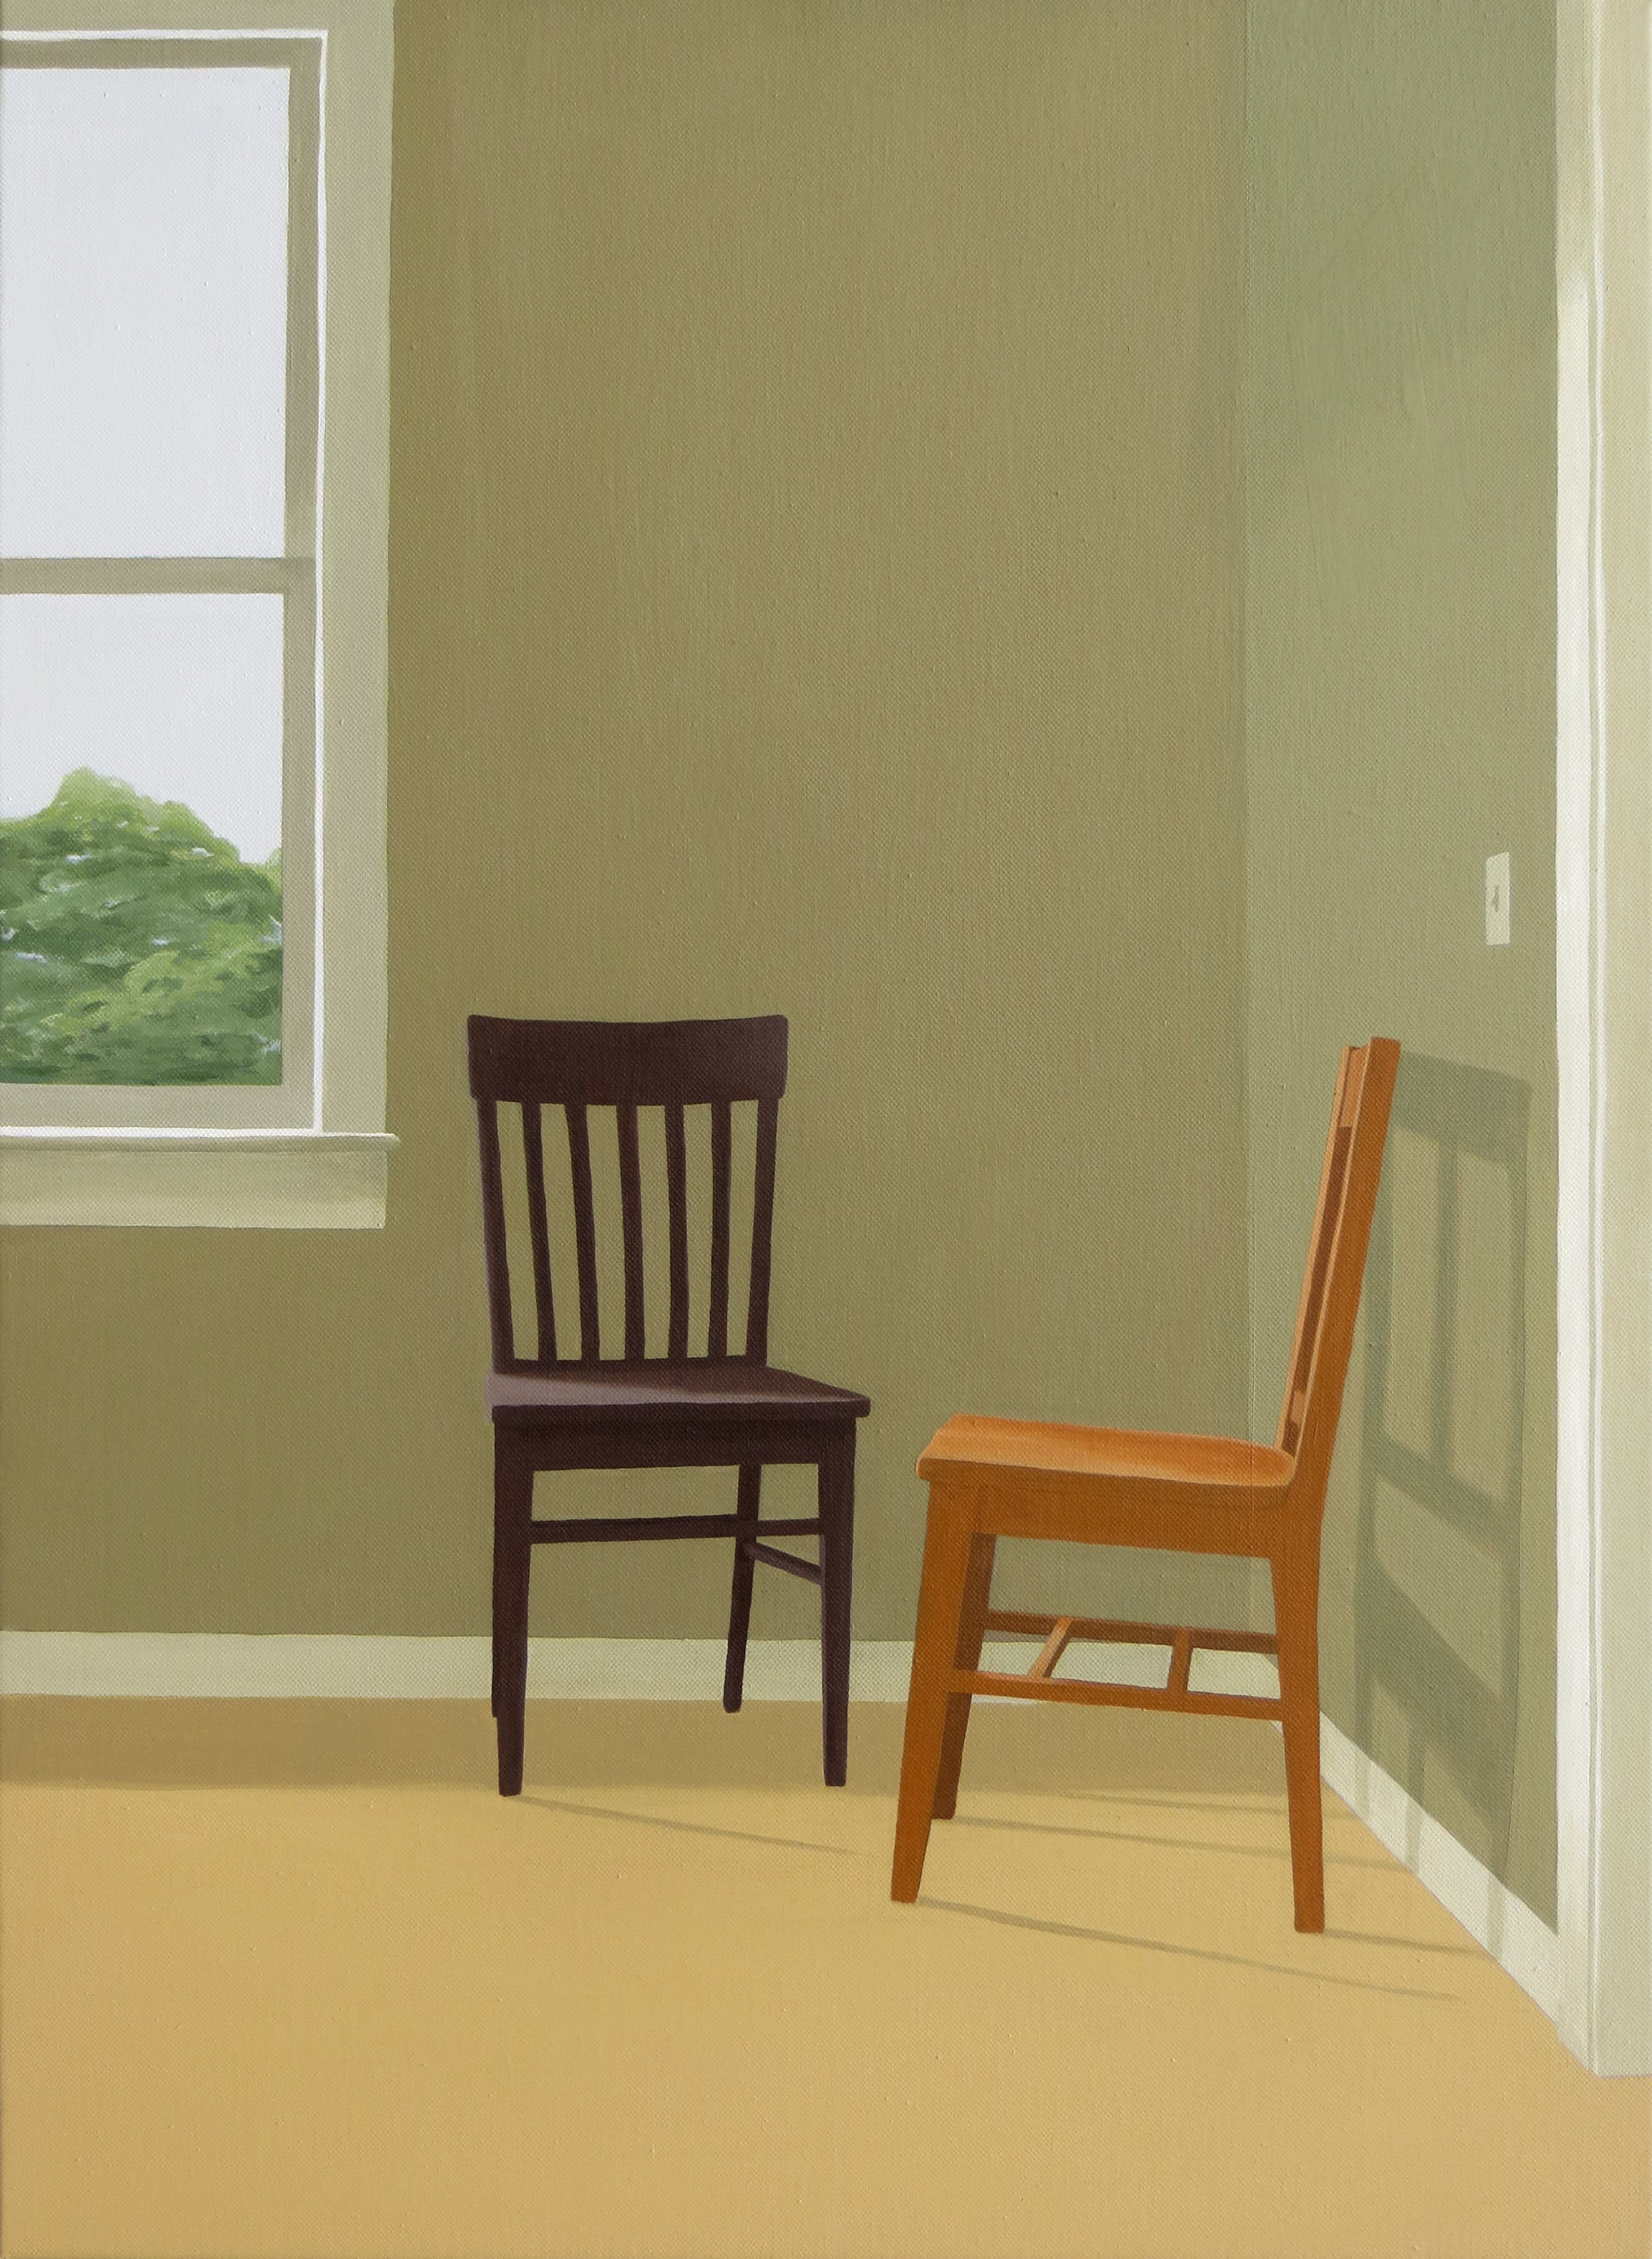 Two Chairs by Window